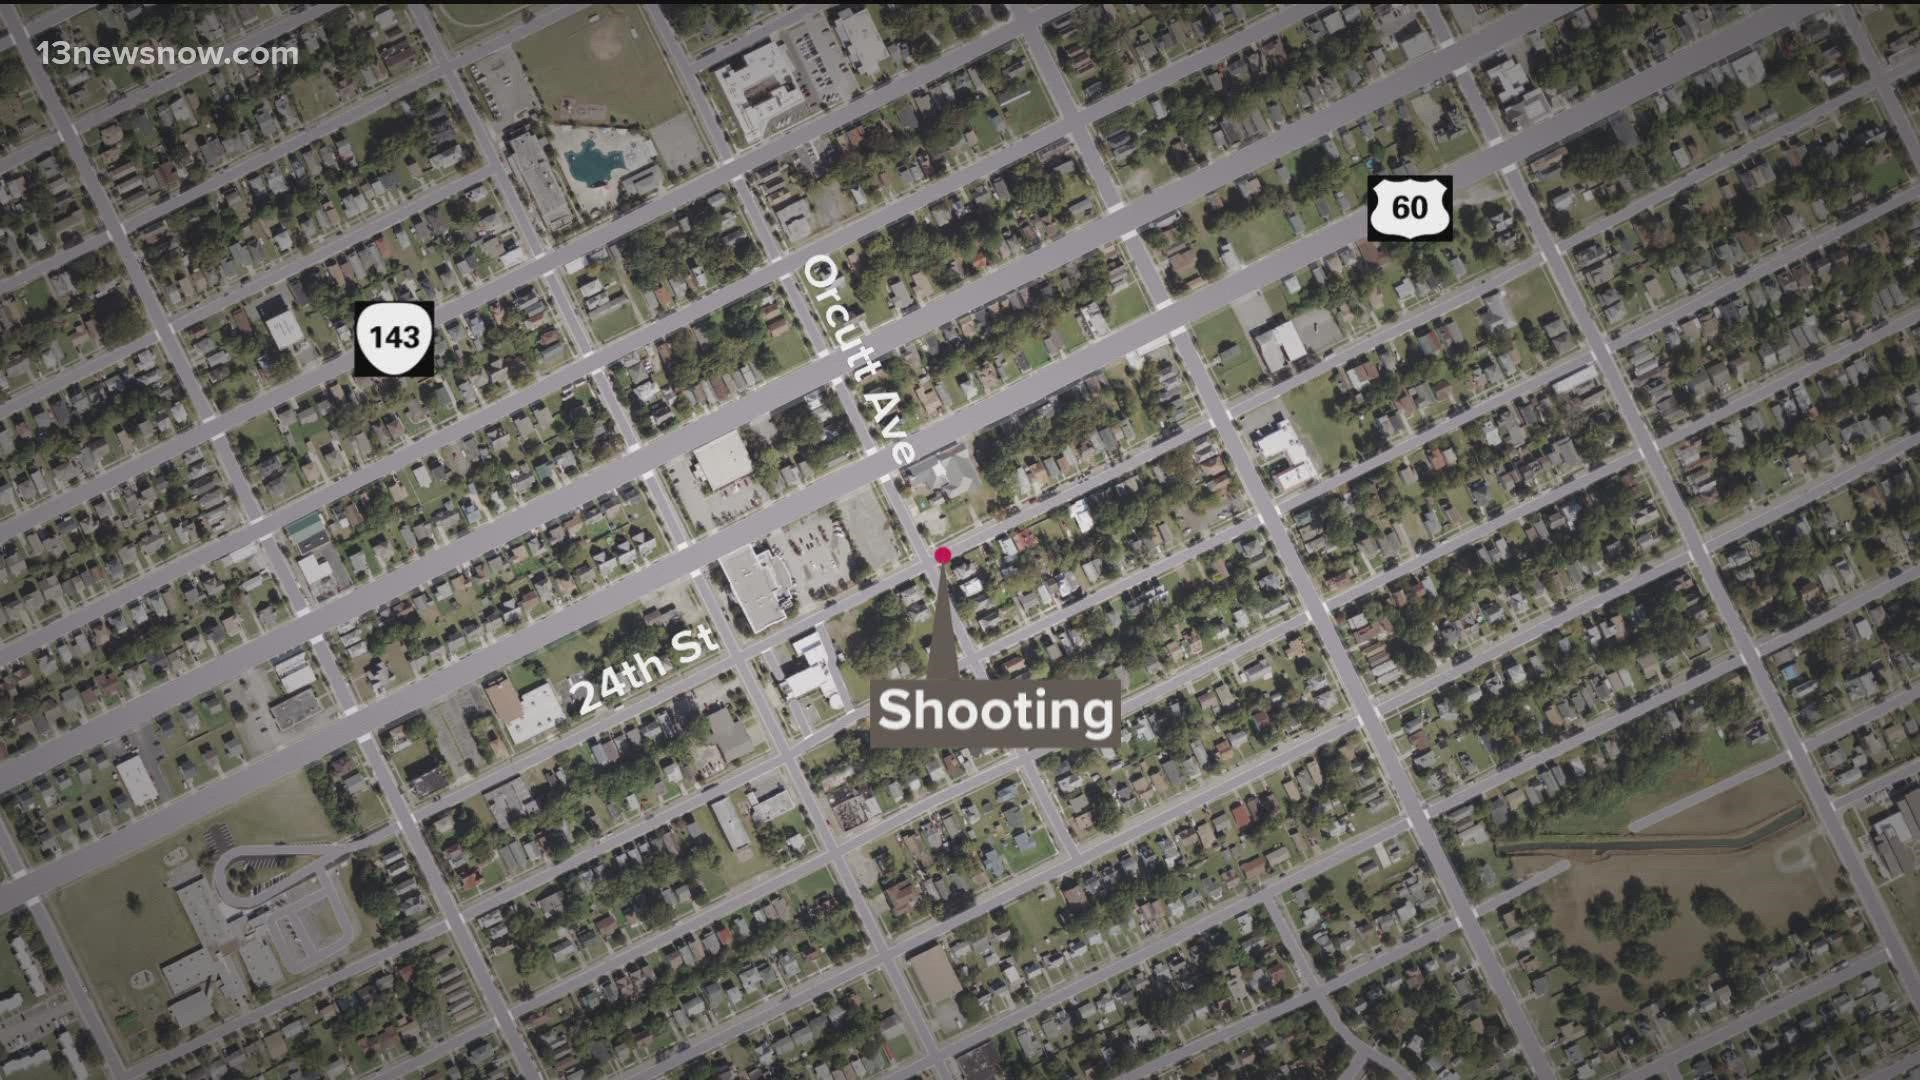 Police found the man with life-threatening gunshot wounds.